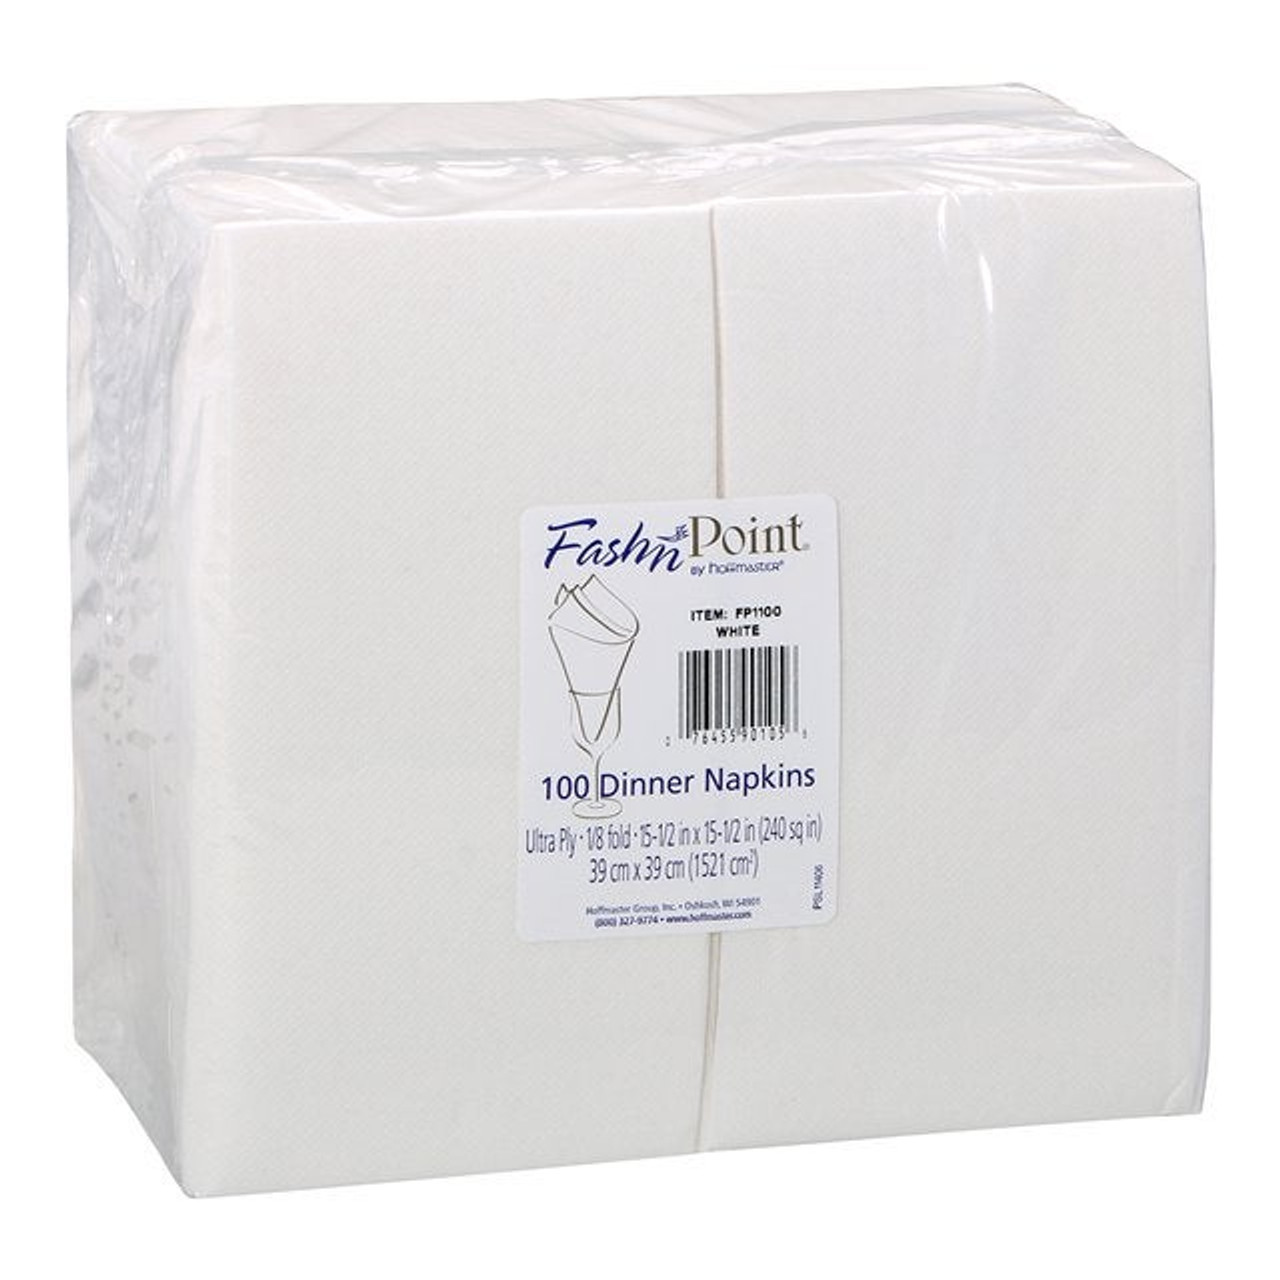 Sun Yellow Paper Dinner Napkins, 2-Ply, 15 x 17 - Hoffmaster 180540 -  1000/Case